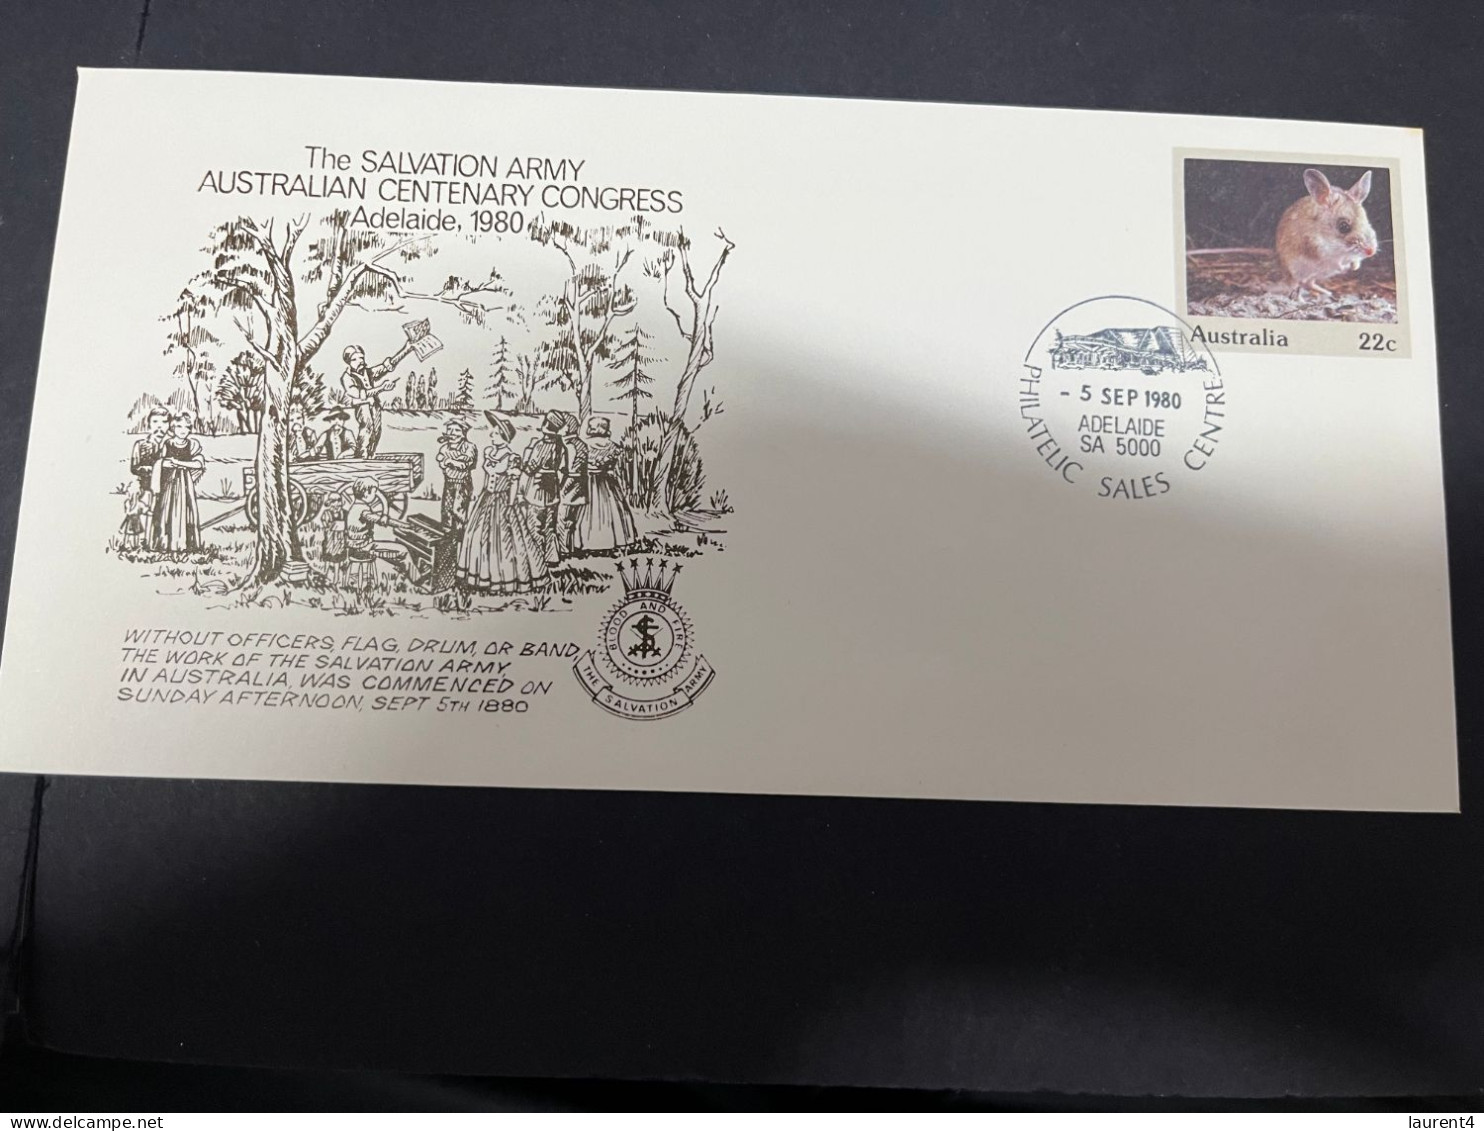 30-4-2023 (3 Z 29) Australia FDC (1 Covers) 1980- Salvation Army Australian Centenary Congress In Adelaide - Ersttagsbelege (FDC)